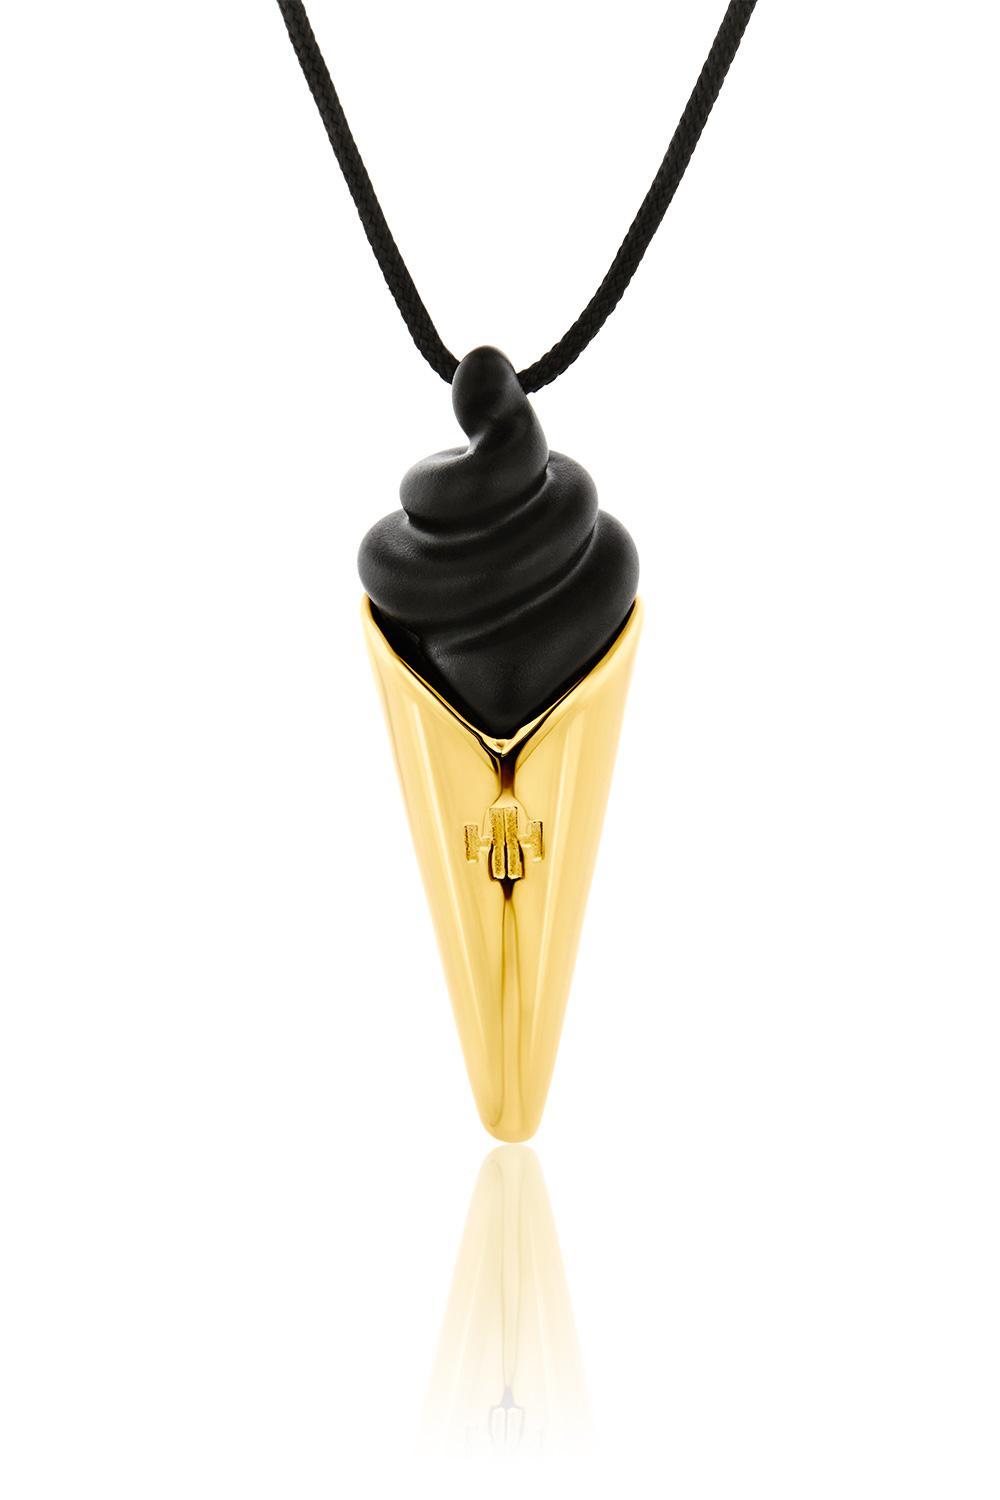 honor ice cream cone gold black necklace honorp129 image1